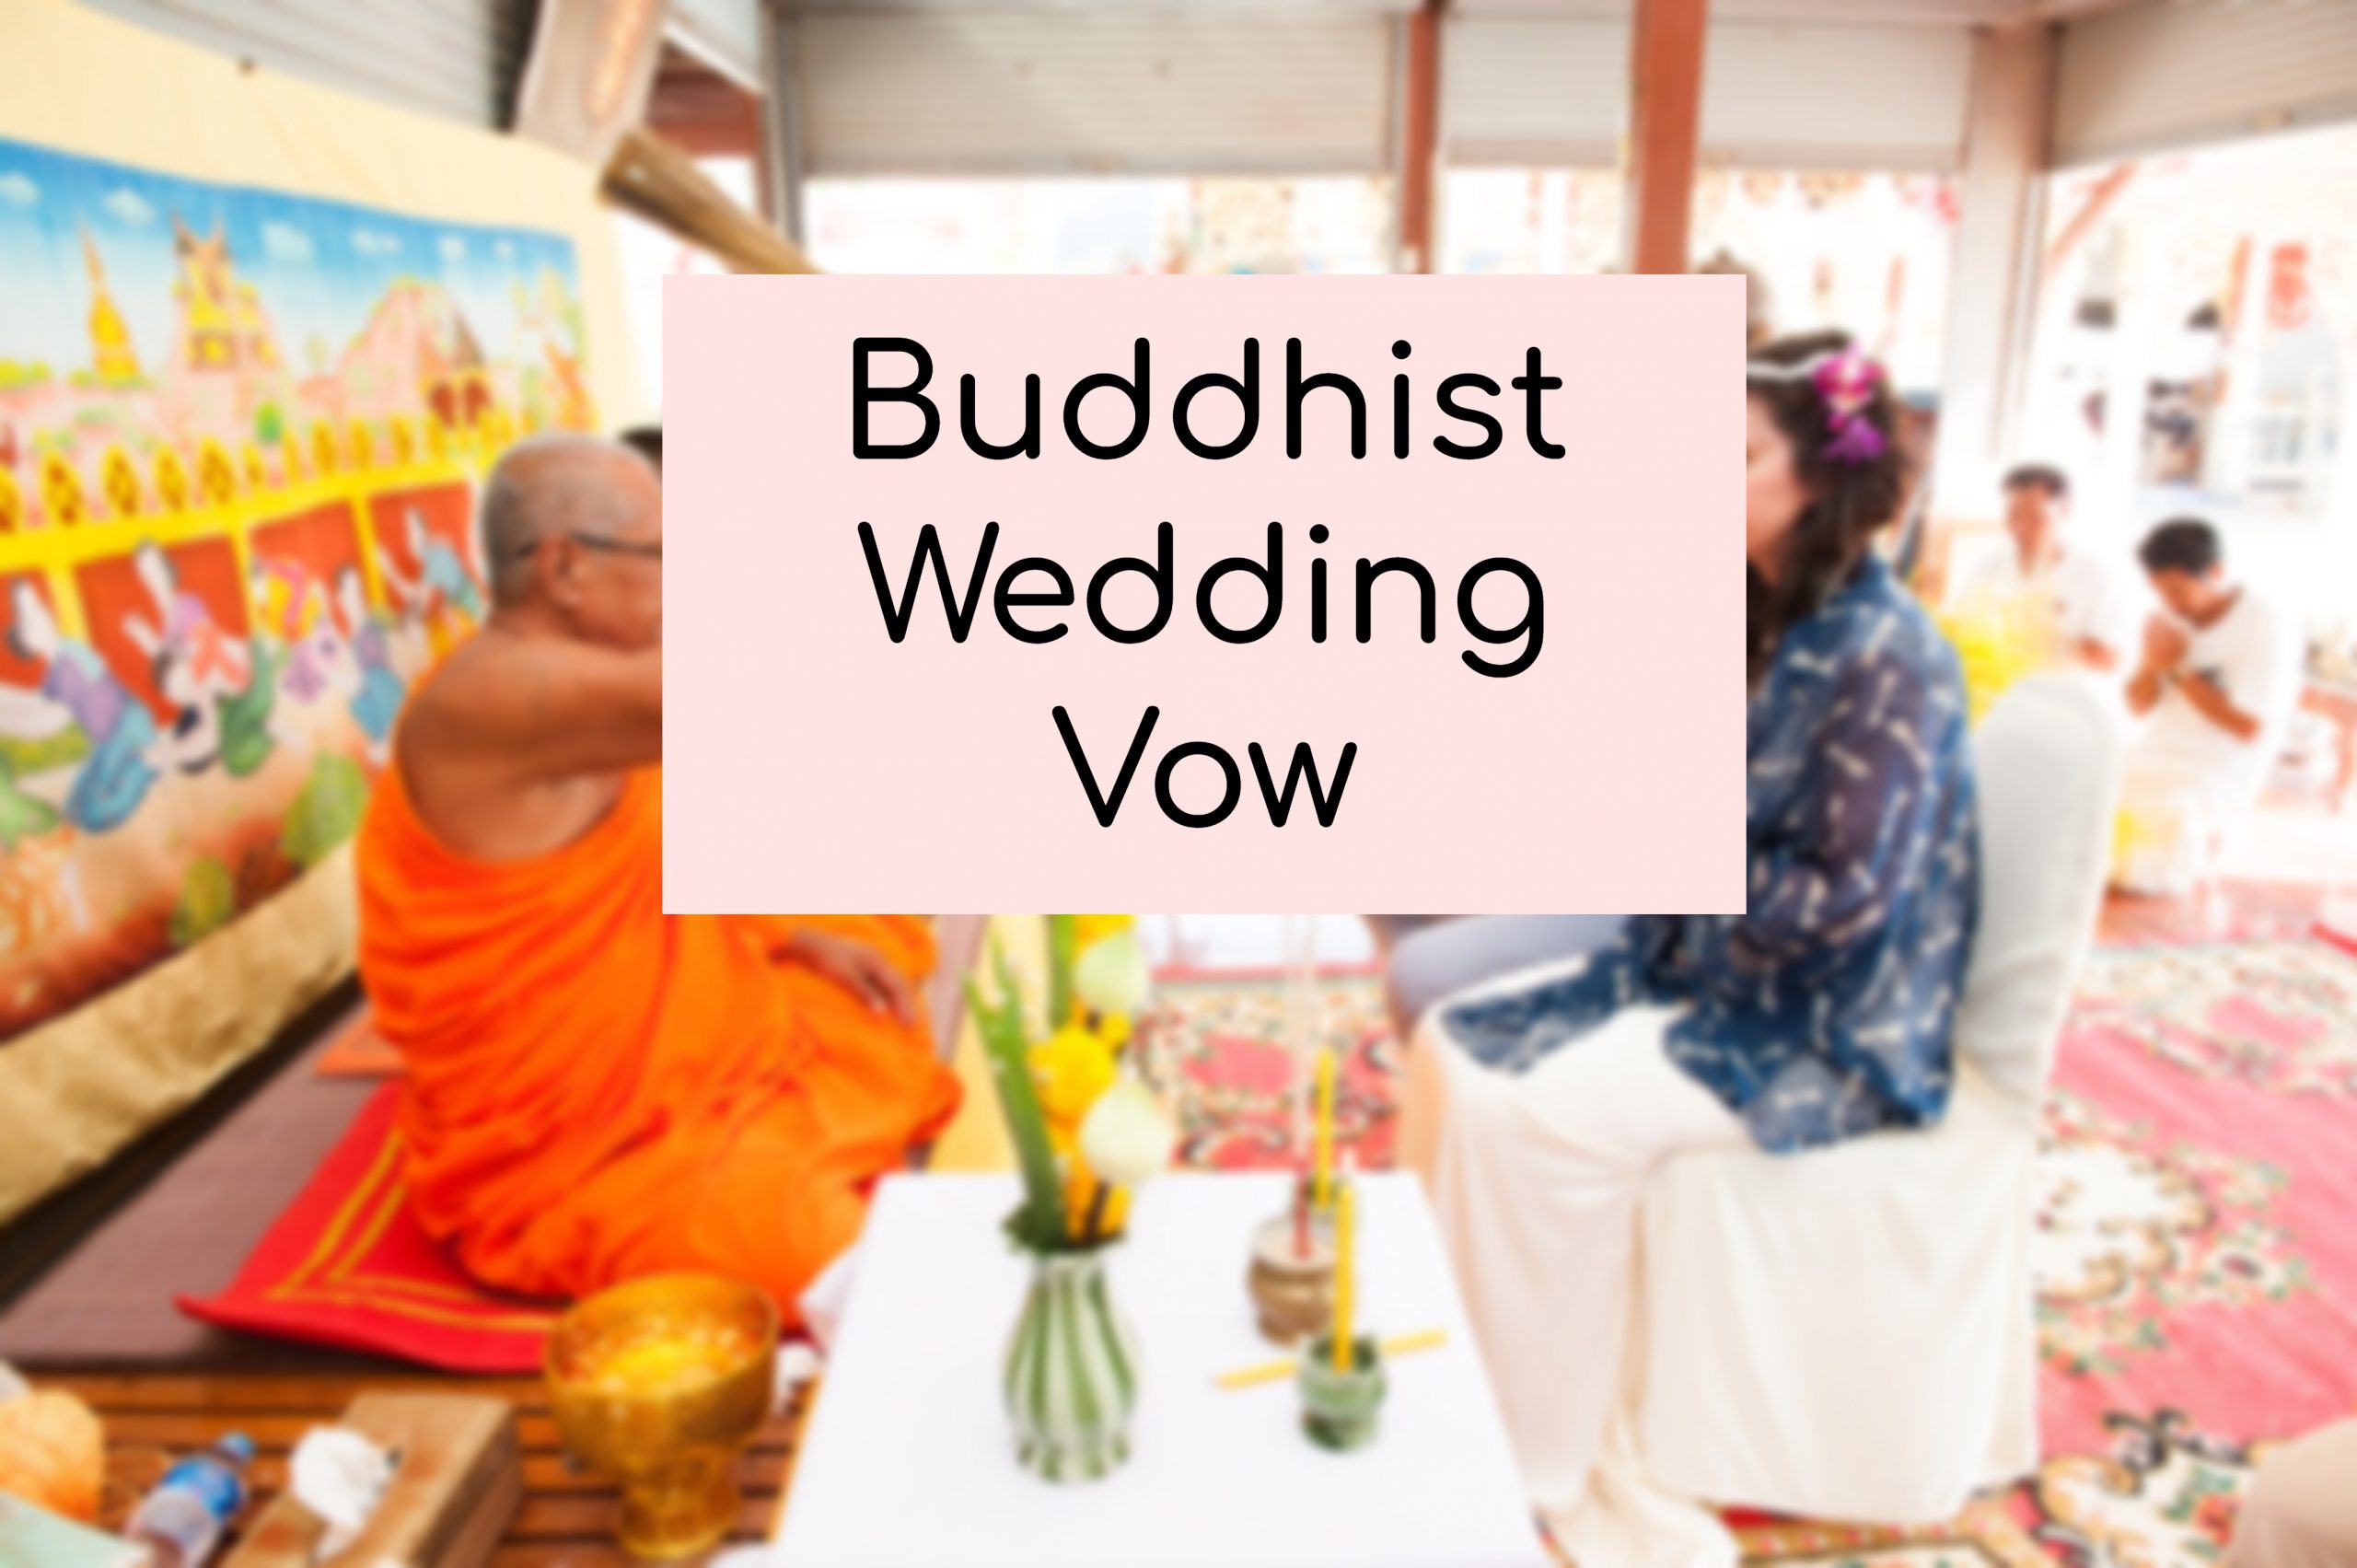 New Traditional Buddhist Wedding Vows